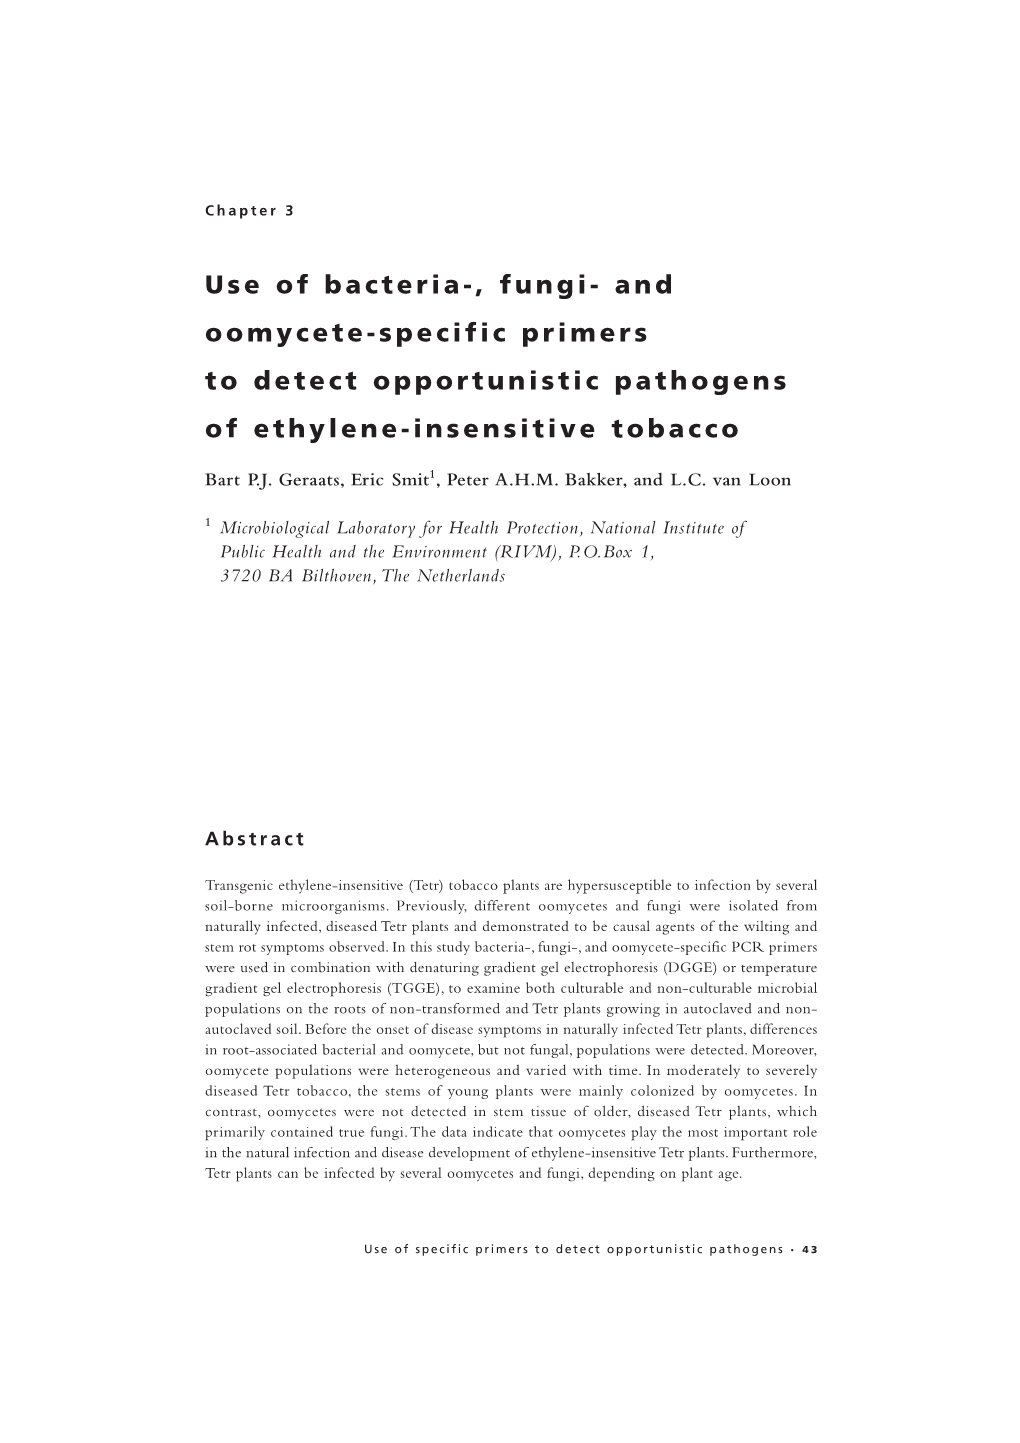 Use of Bacteria-, Fungi- and Oomycete-Specific Primers to Detect Opportunistic Pathogens of Ethylene-Insensitive Tobacco